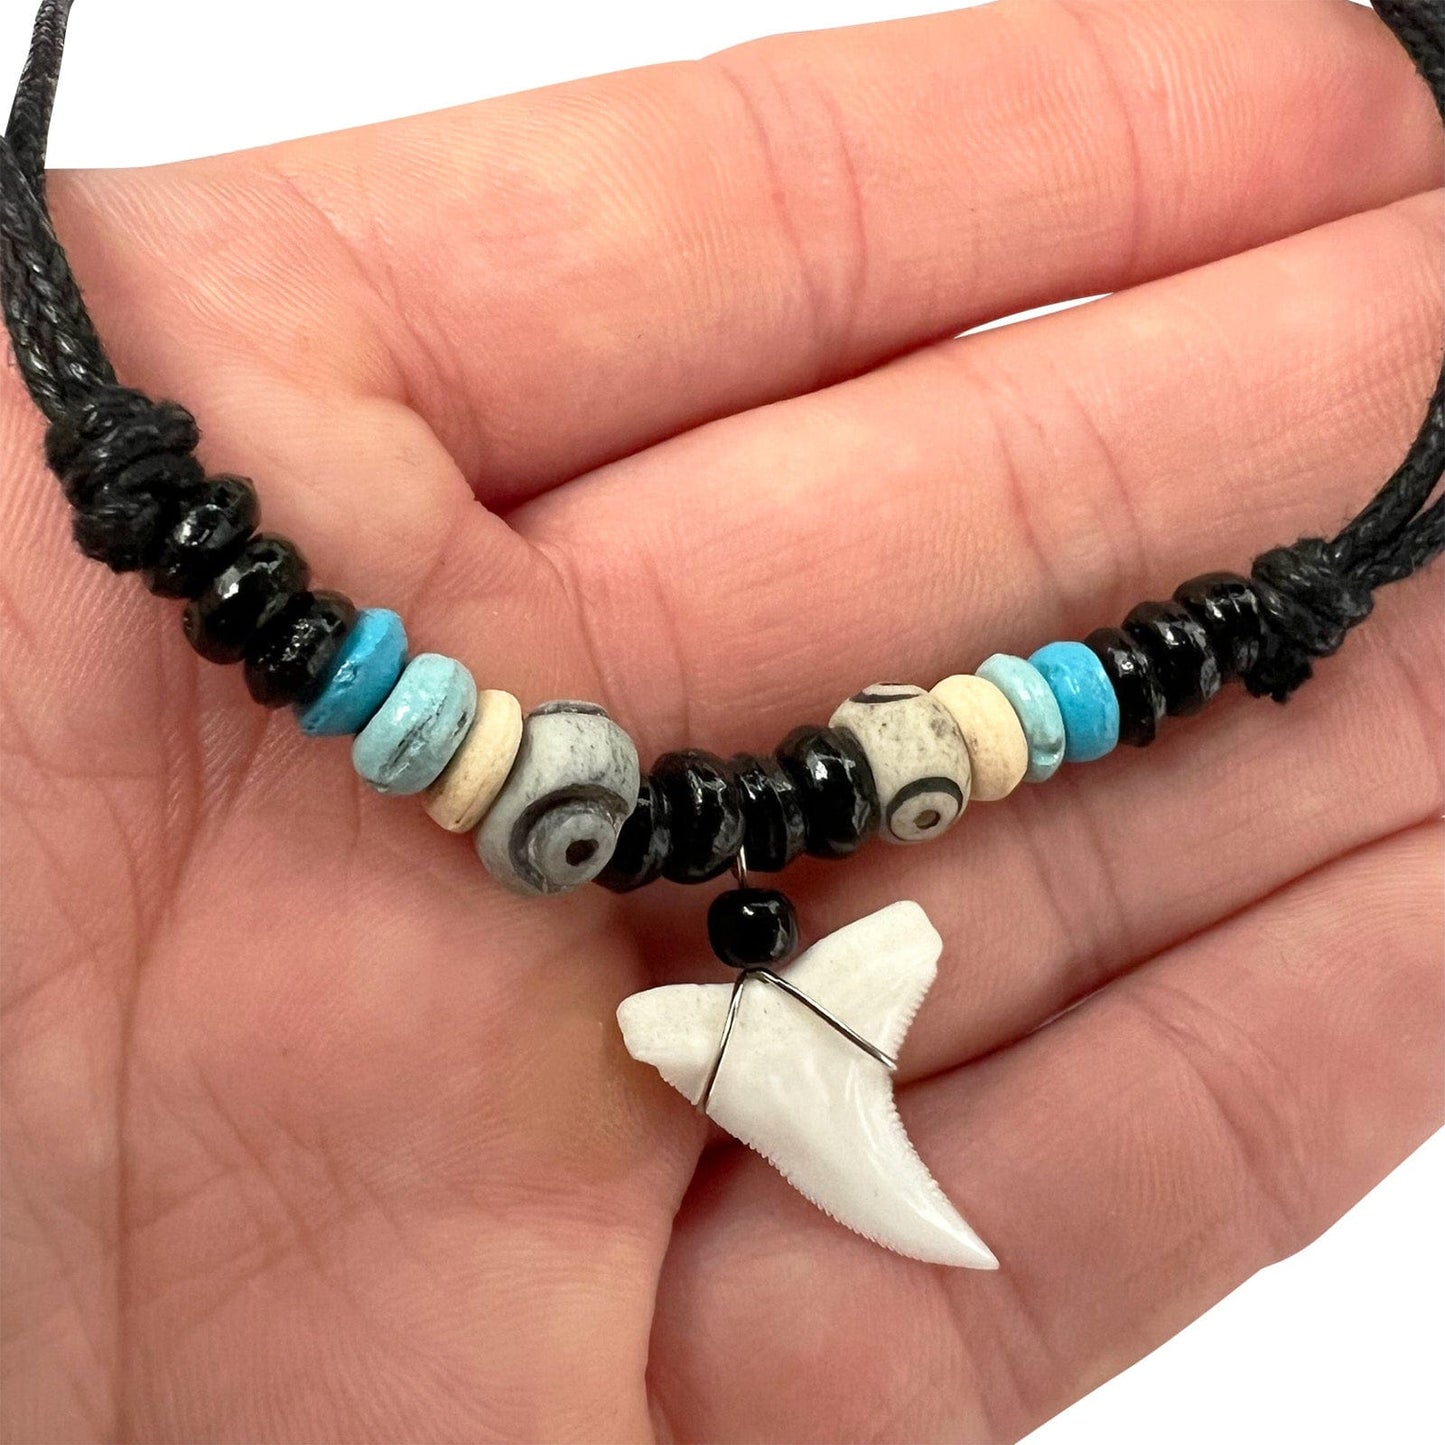 Imitation Resin Shark Tooth Pendant Necklace Wood Beads Cord Chain Mens Ladies Costume Jewellery